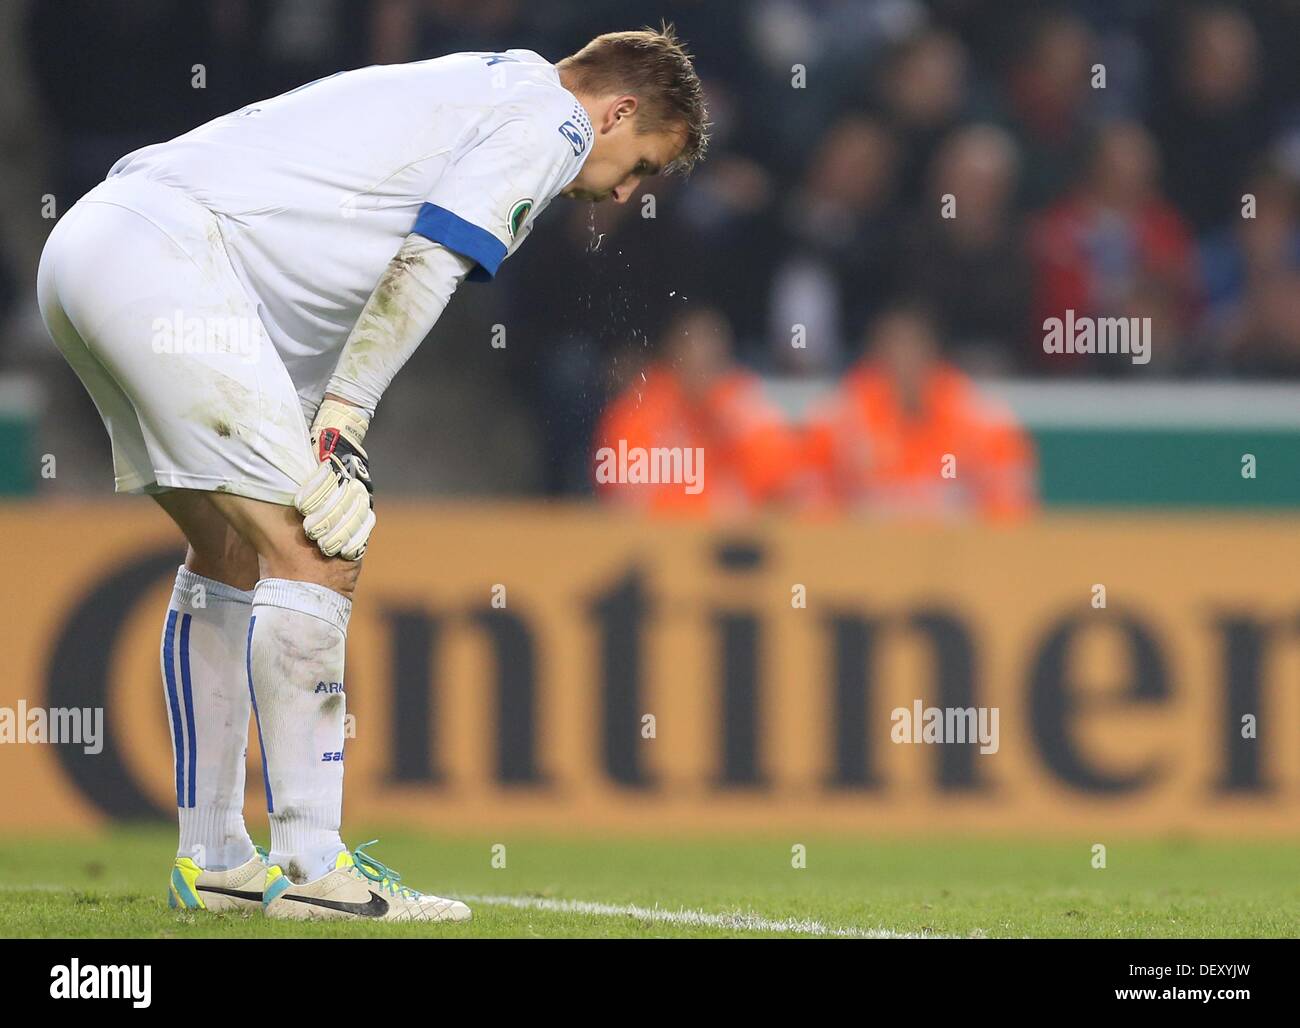 Bielefeld, Germany. 24th Sep, 2013. Leverkusen's goalkeeper Patrick Platins during the DFB Cup match between Arminia Bielefeld and Bayer Leverkusen at Schueco Arena in Bielefeld, Germany, 24 September 2013. Photo: FRISO GENTSCH/dpa/Alamy Live News Stock Photo